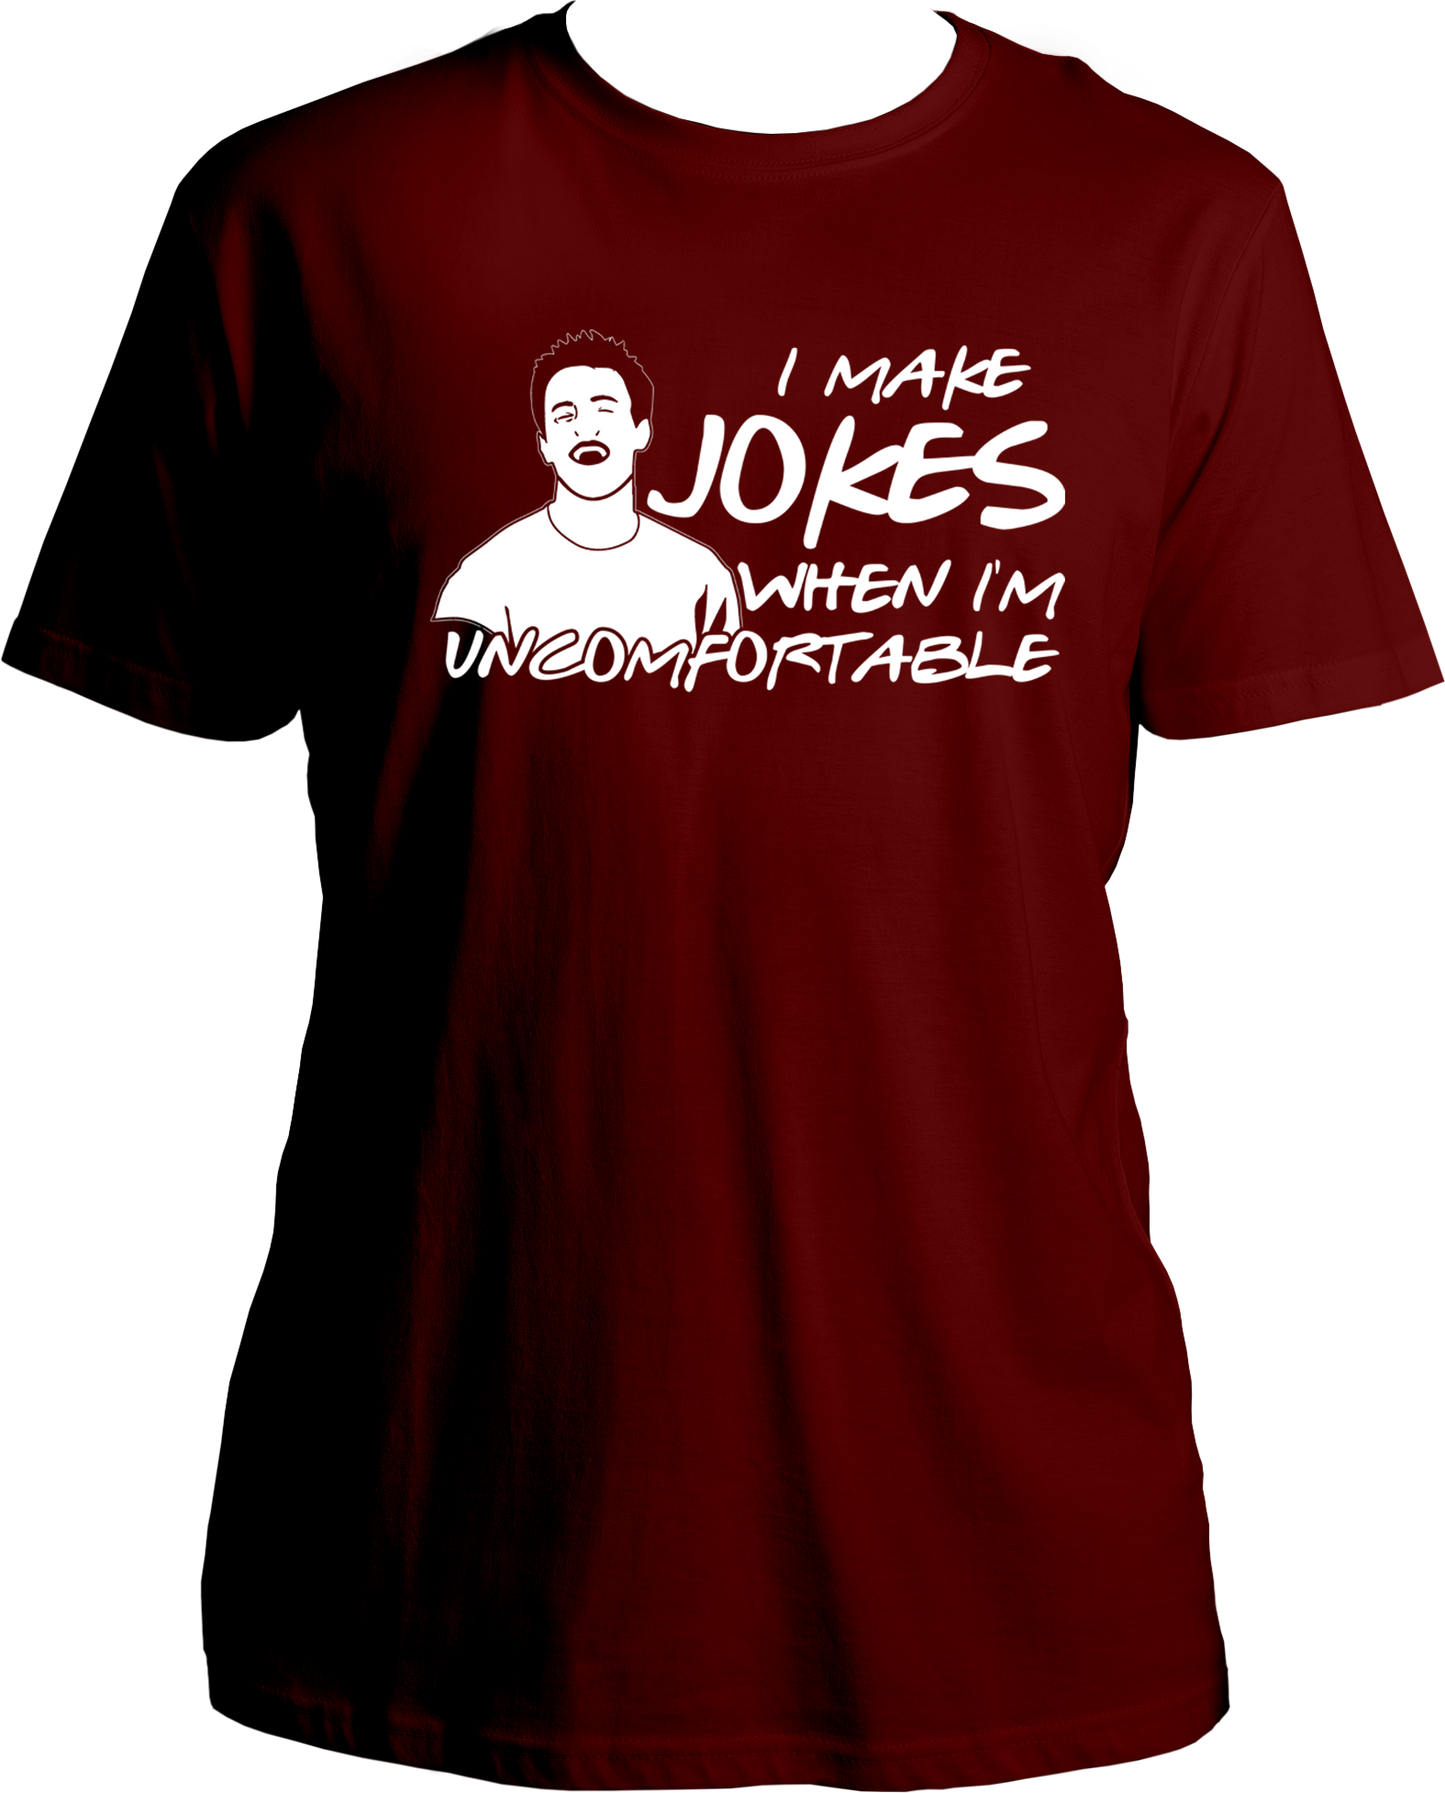 Welcome to our T-shirt haven, where we bring your favorite TV shows to life! Introducing our Round Neck T-shirt under the F.R.I.E.N.D.S. category, featuring the iconic Chandler Bing quote, "I Make Jokes When I'm Uncomfortable." Step into the world of laughter and camaraderie inspired by the legendary sitcom, Friends.